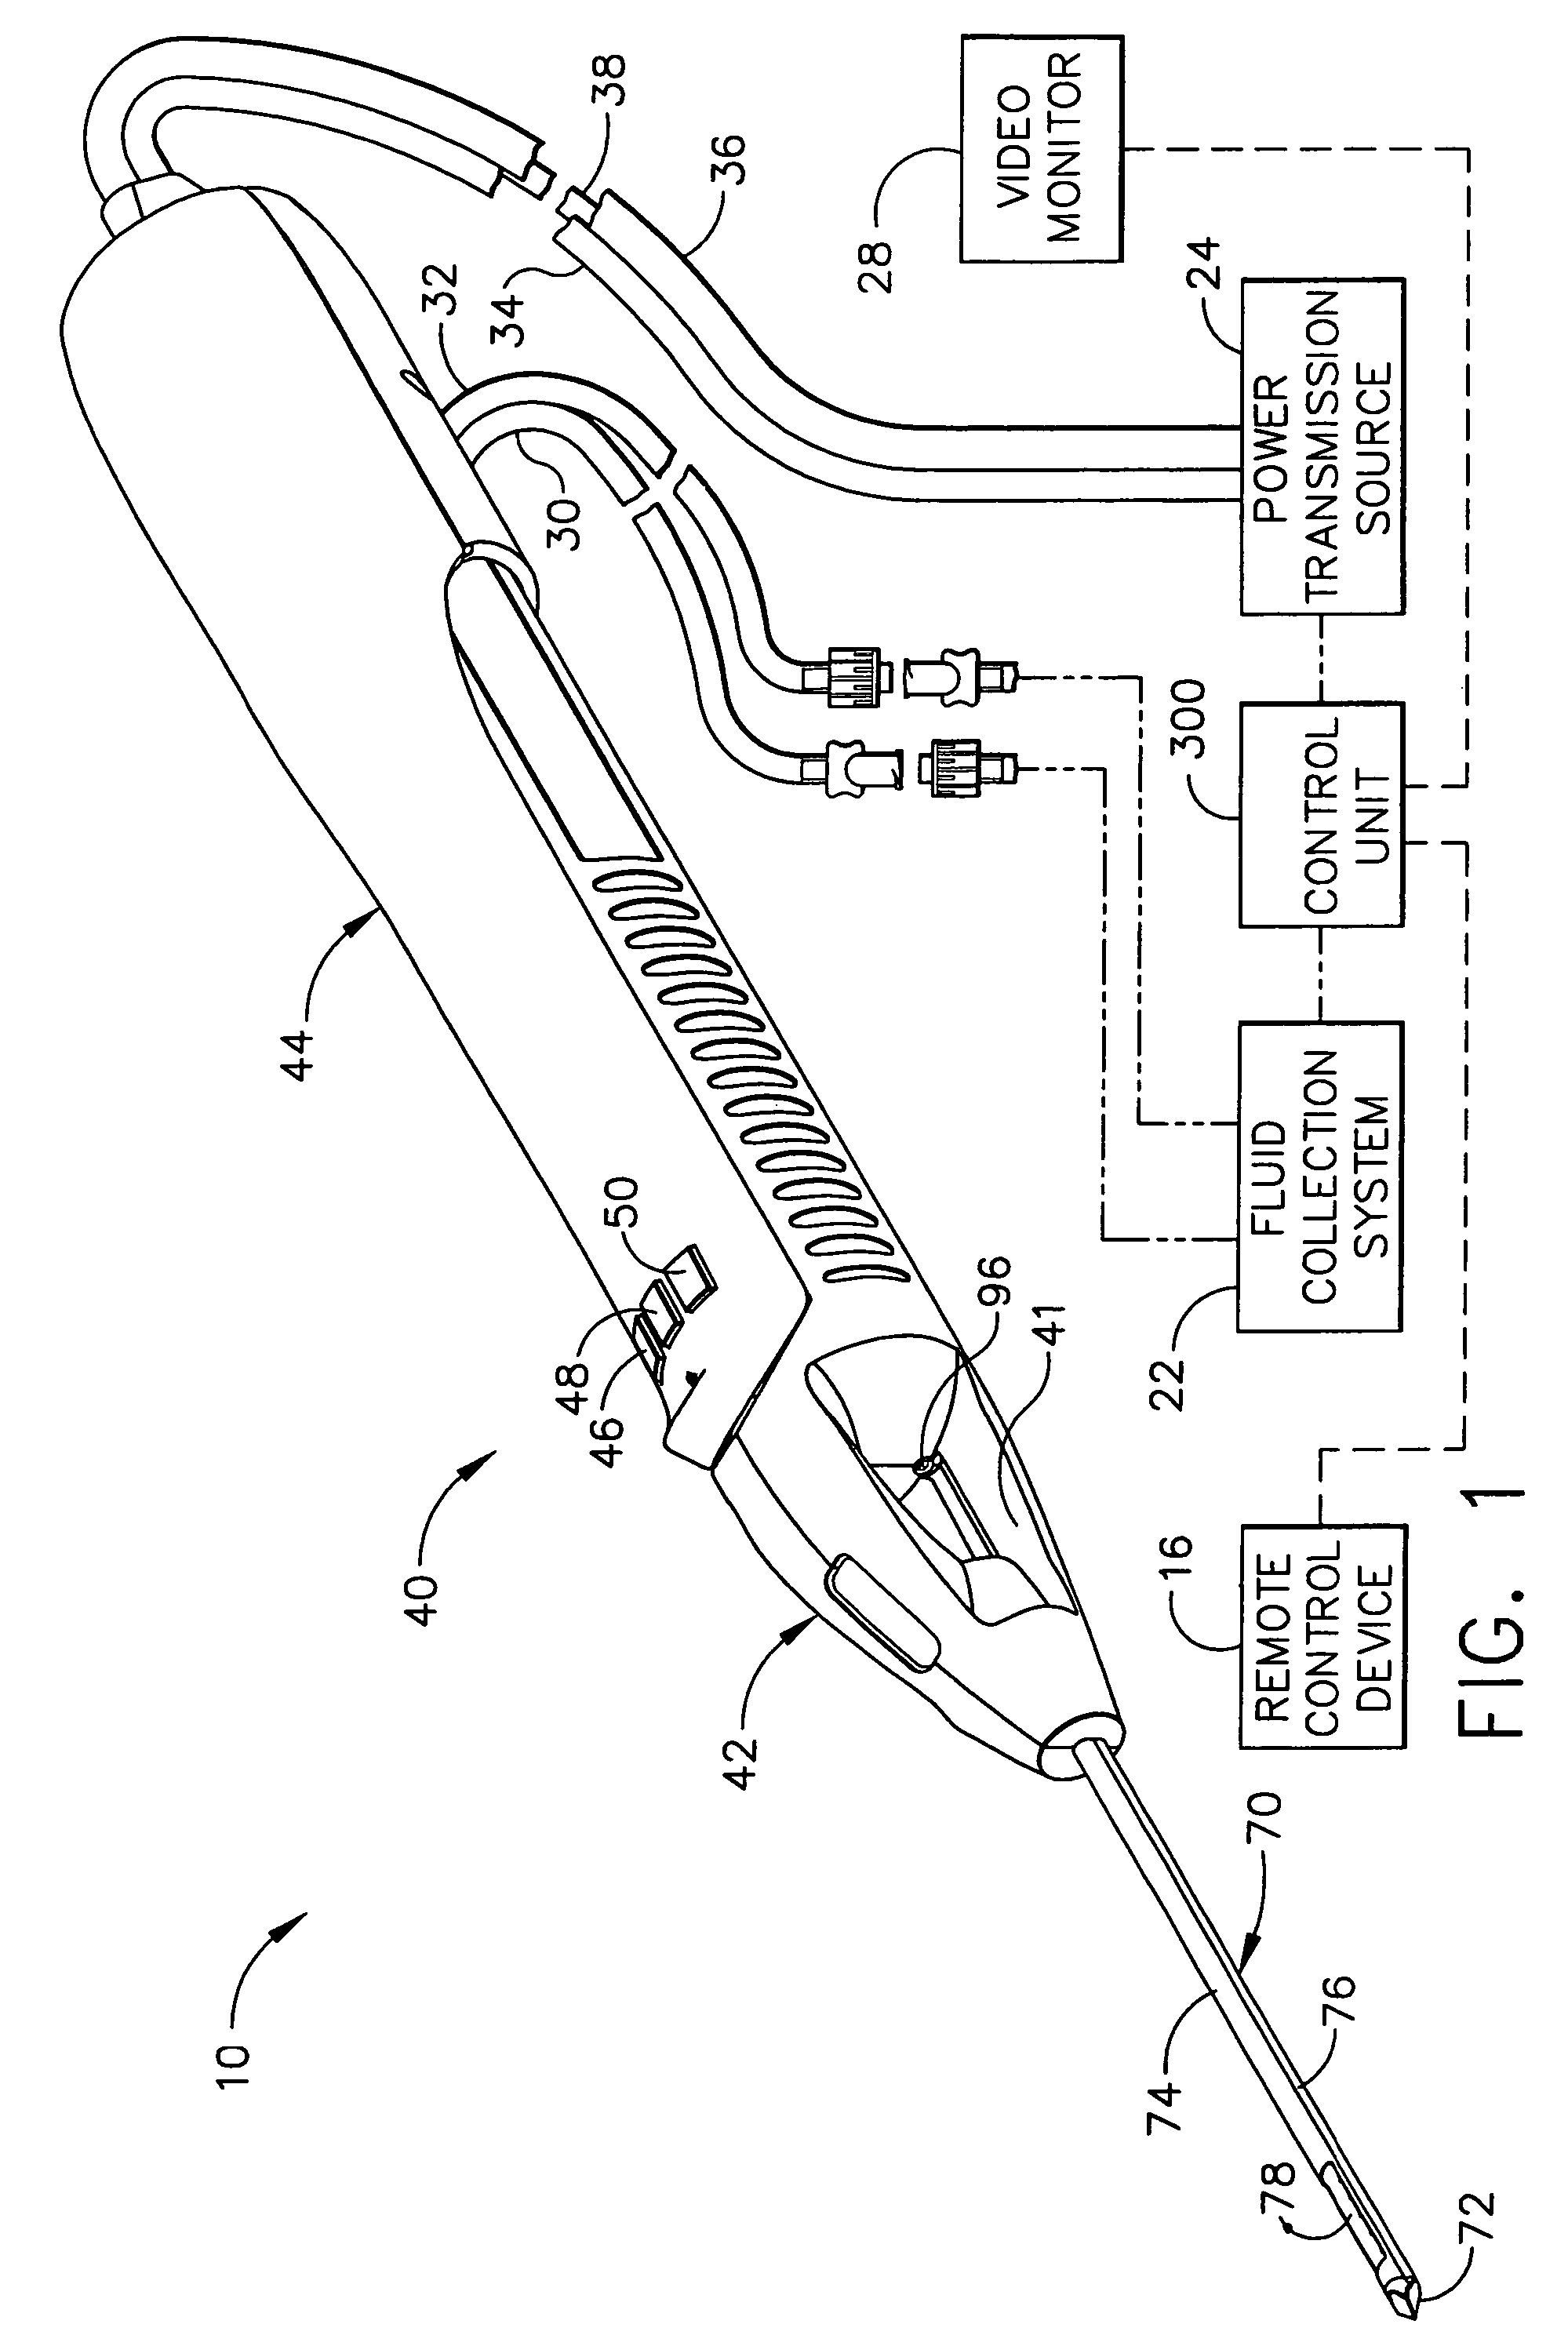 Surgical biopsy system with control unit for selecting an operational mode